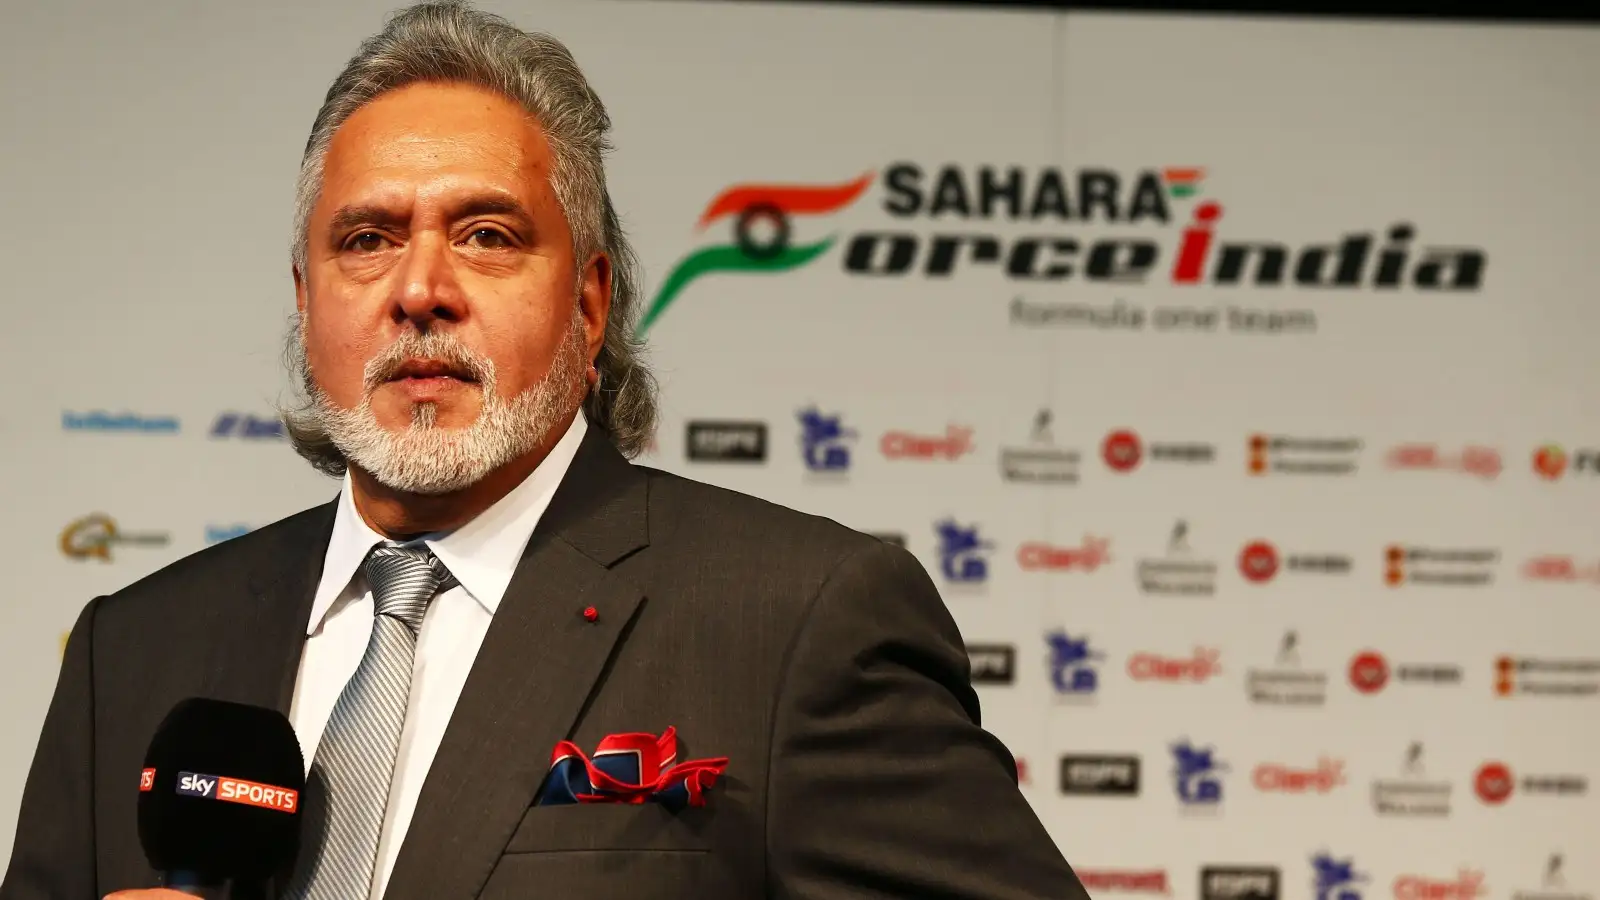 Vijay Mallya, former owner of Force India, speaking at a season launch. England, February 2017.